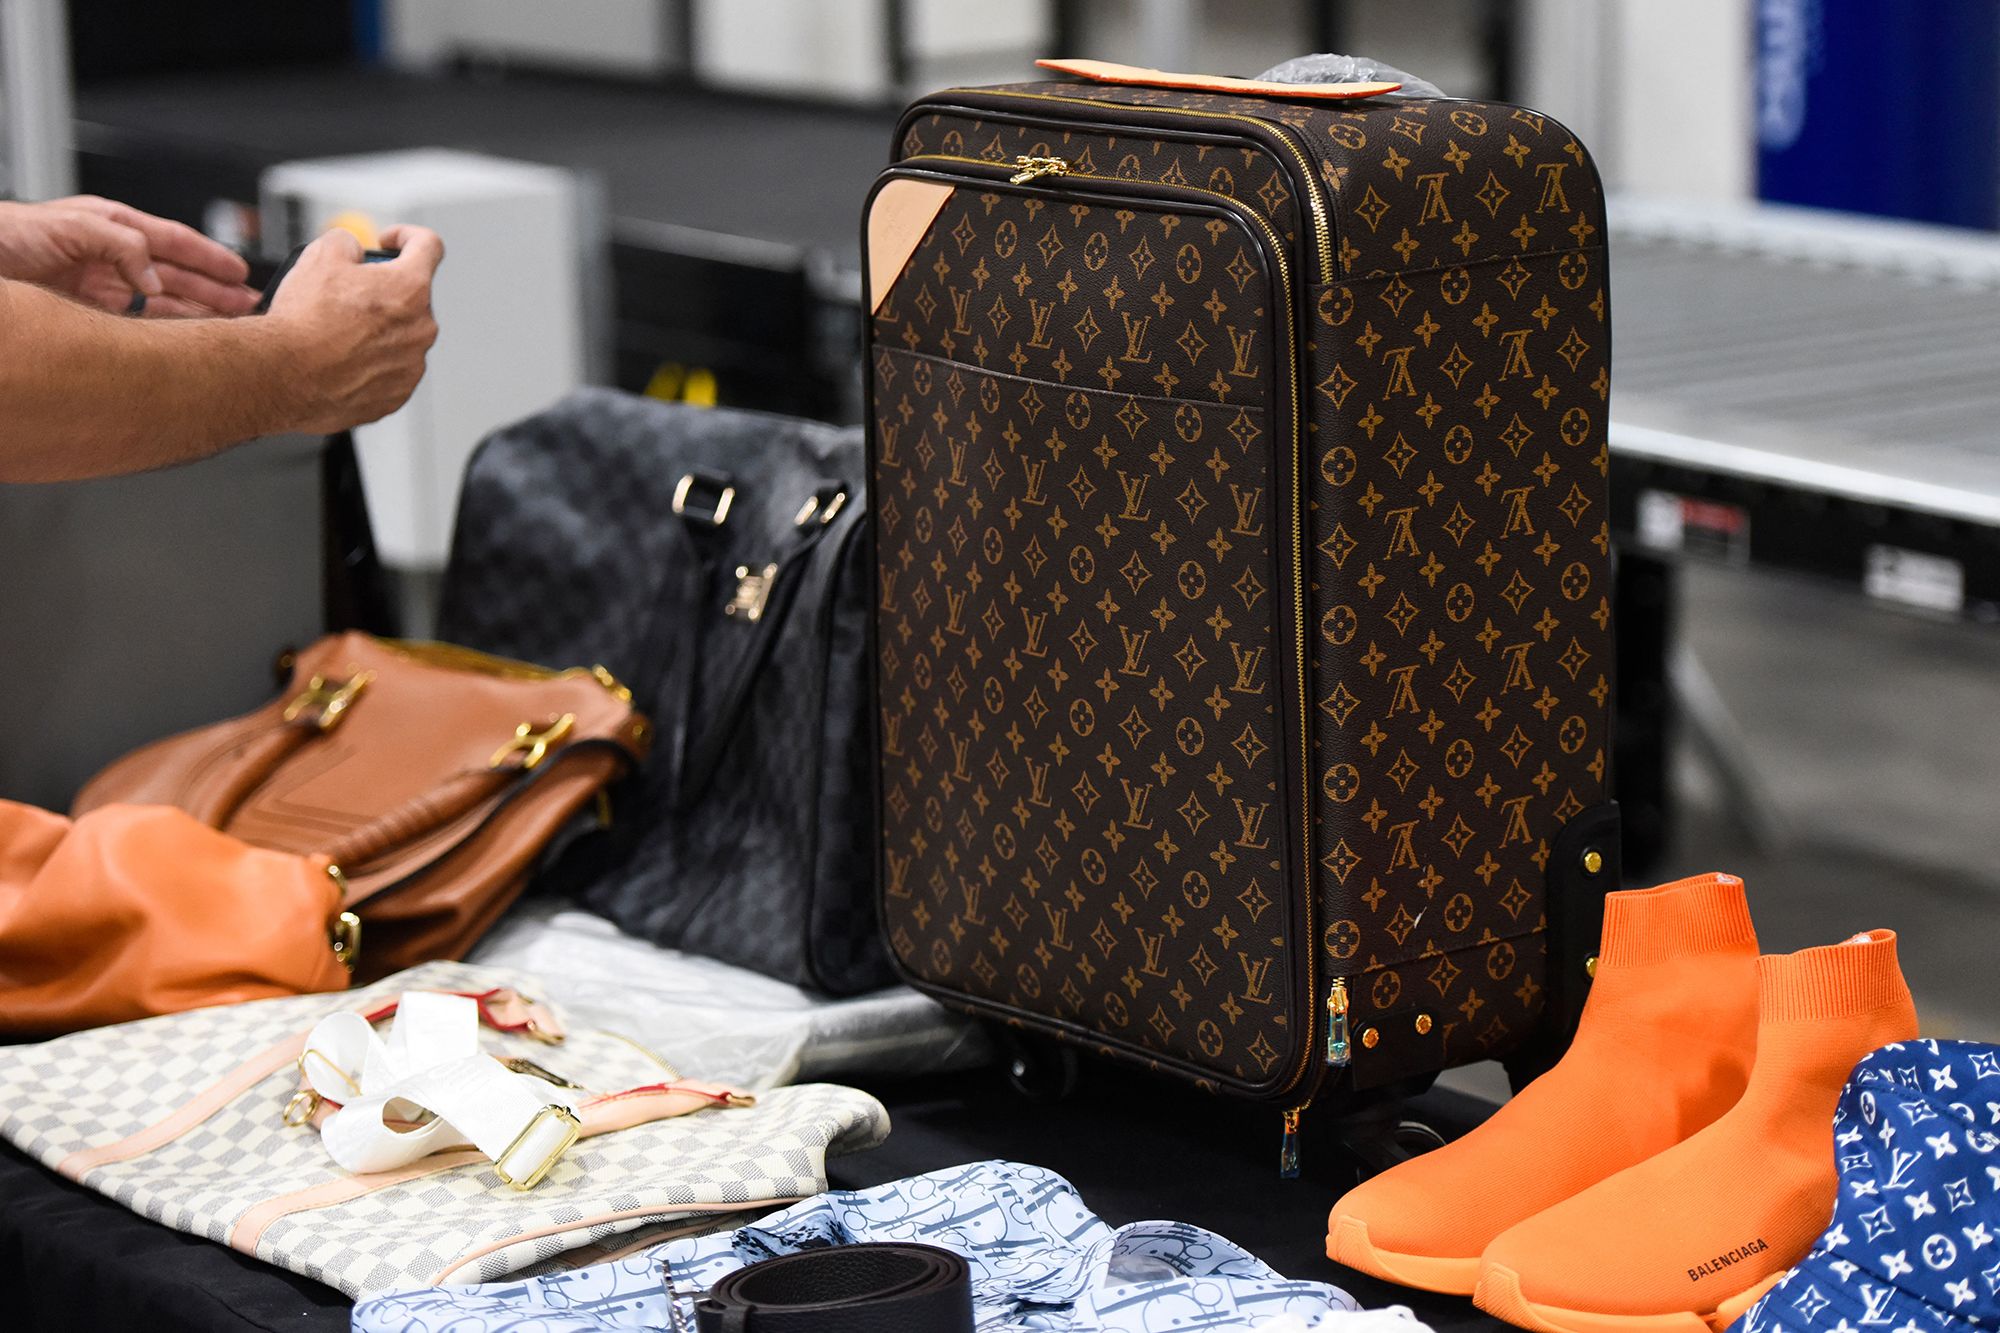 Blockchain explored by Louis Vuitton, Prada and Cartier to fight  counterfeiters by guaranteeing the authenticity of luxury fashion items